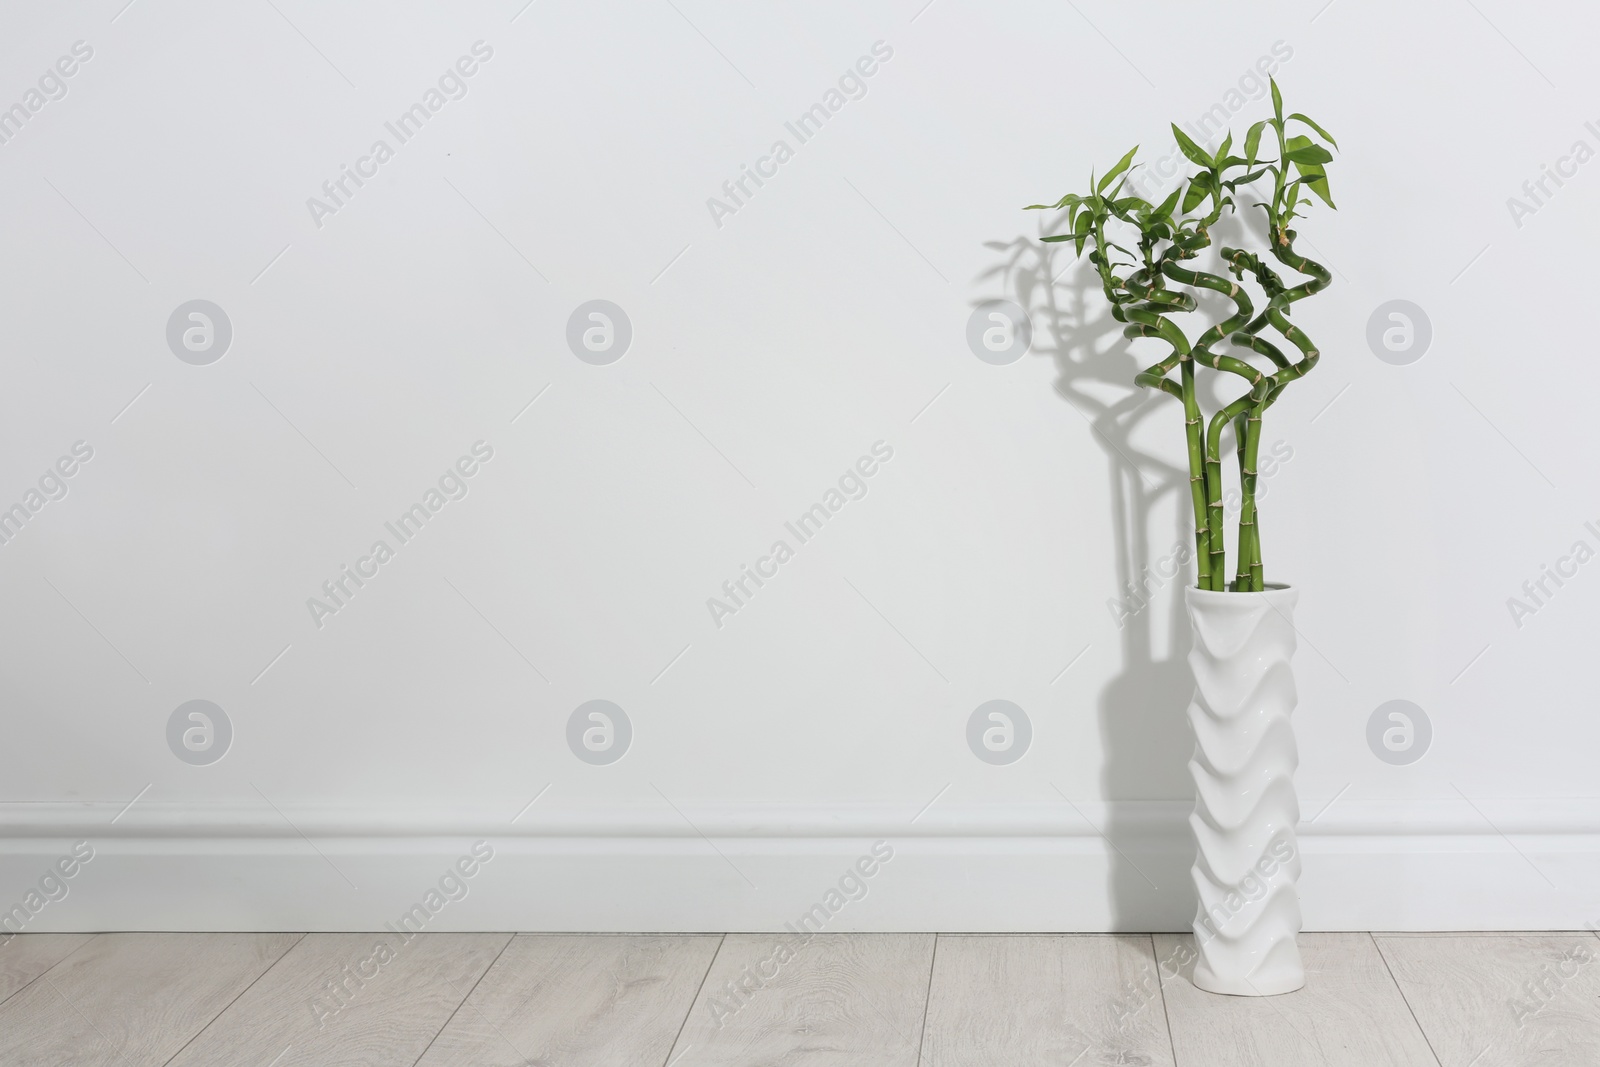 Photo of Vase with green bamboo on floor near light wall. Space for text